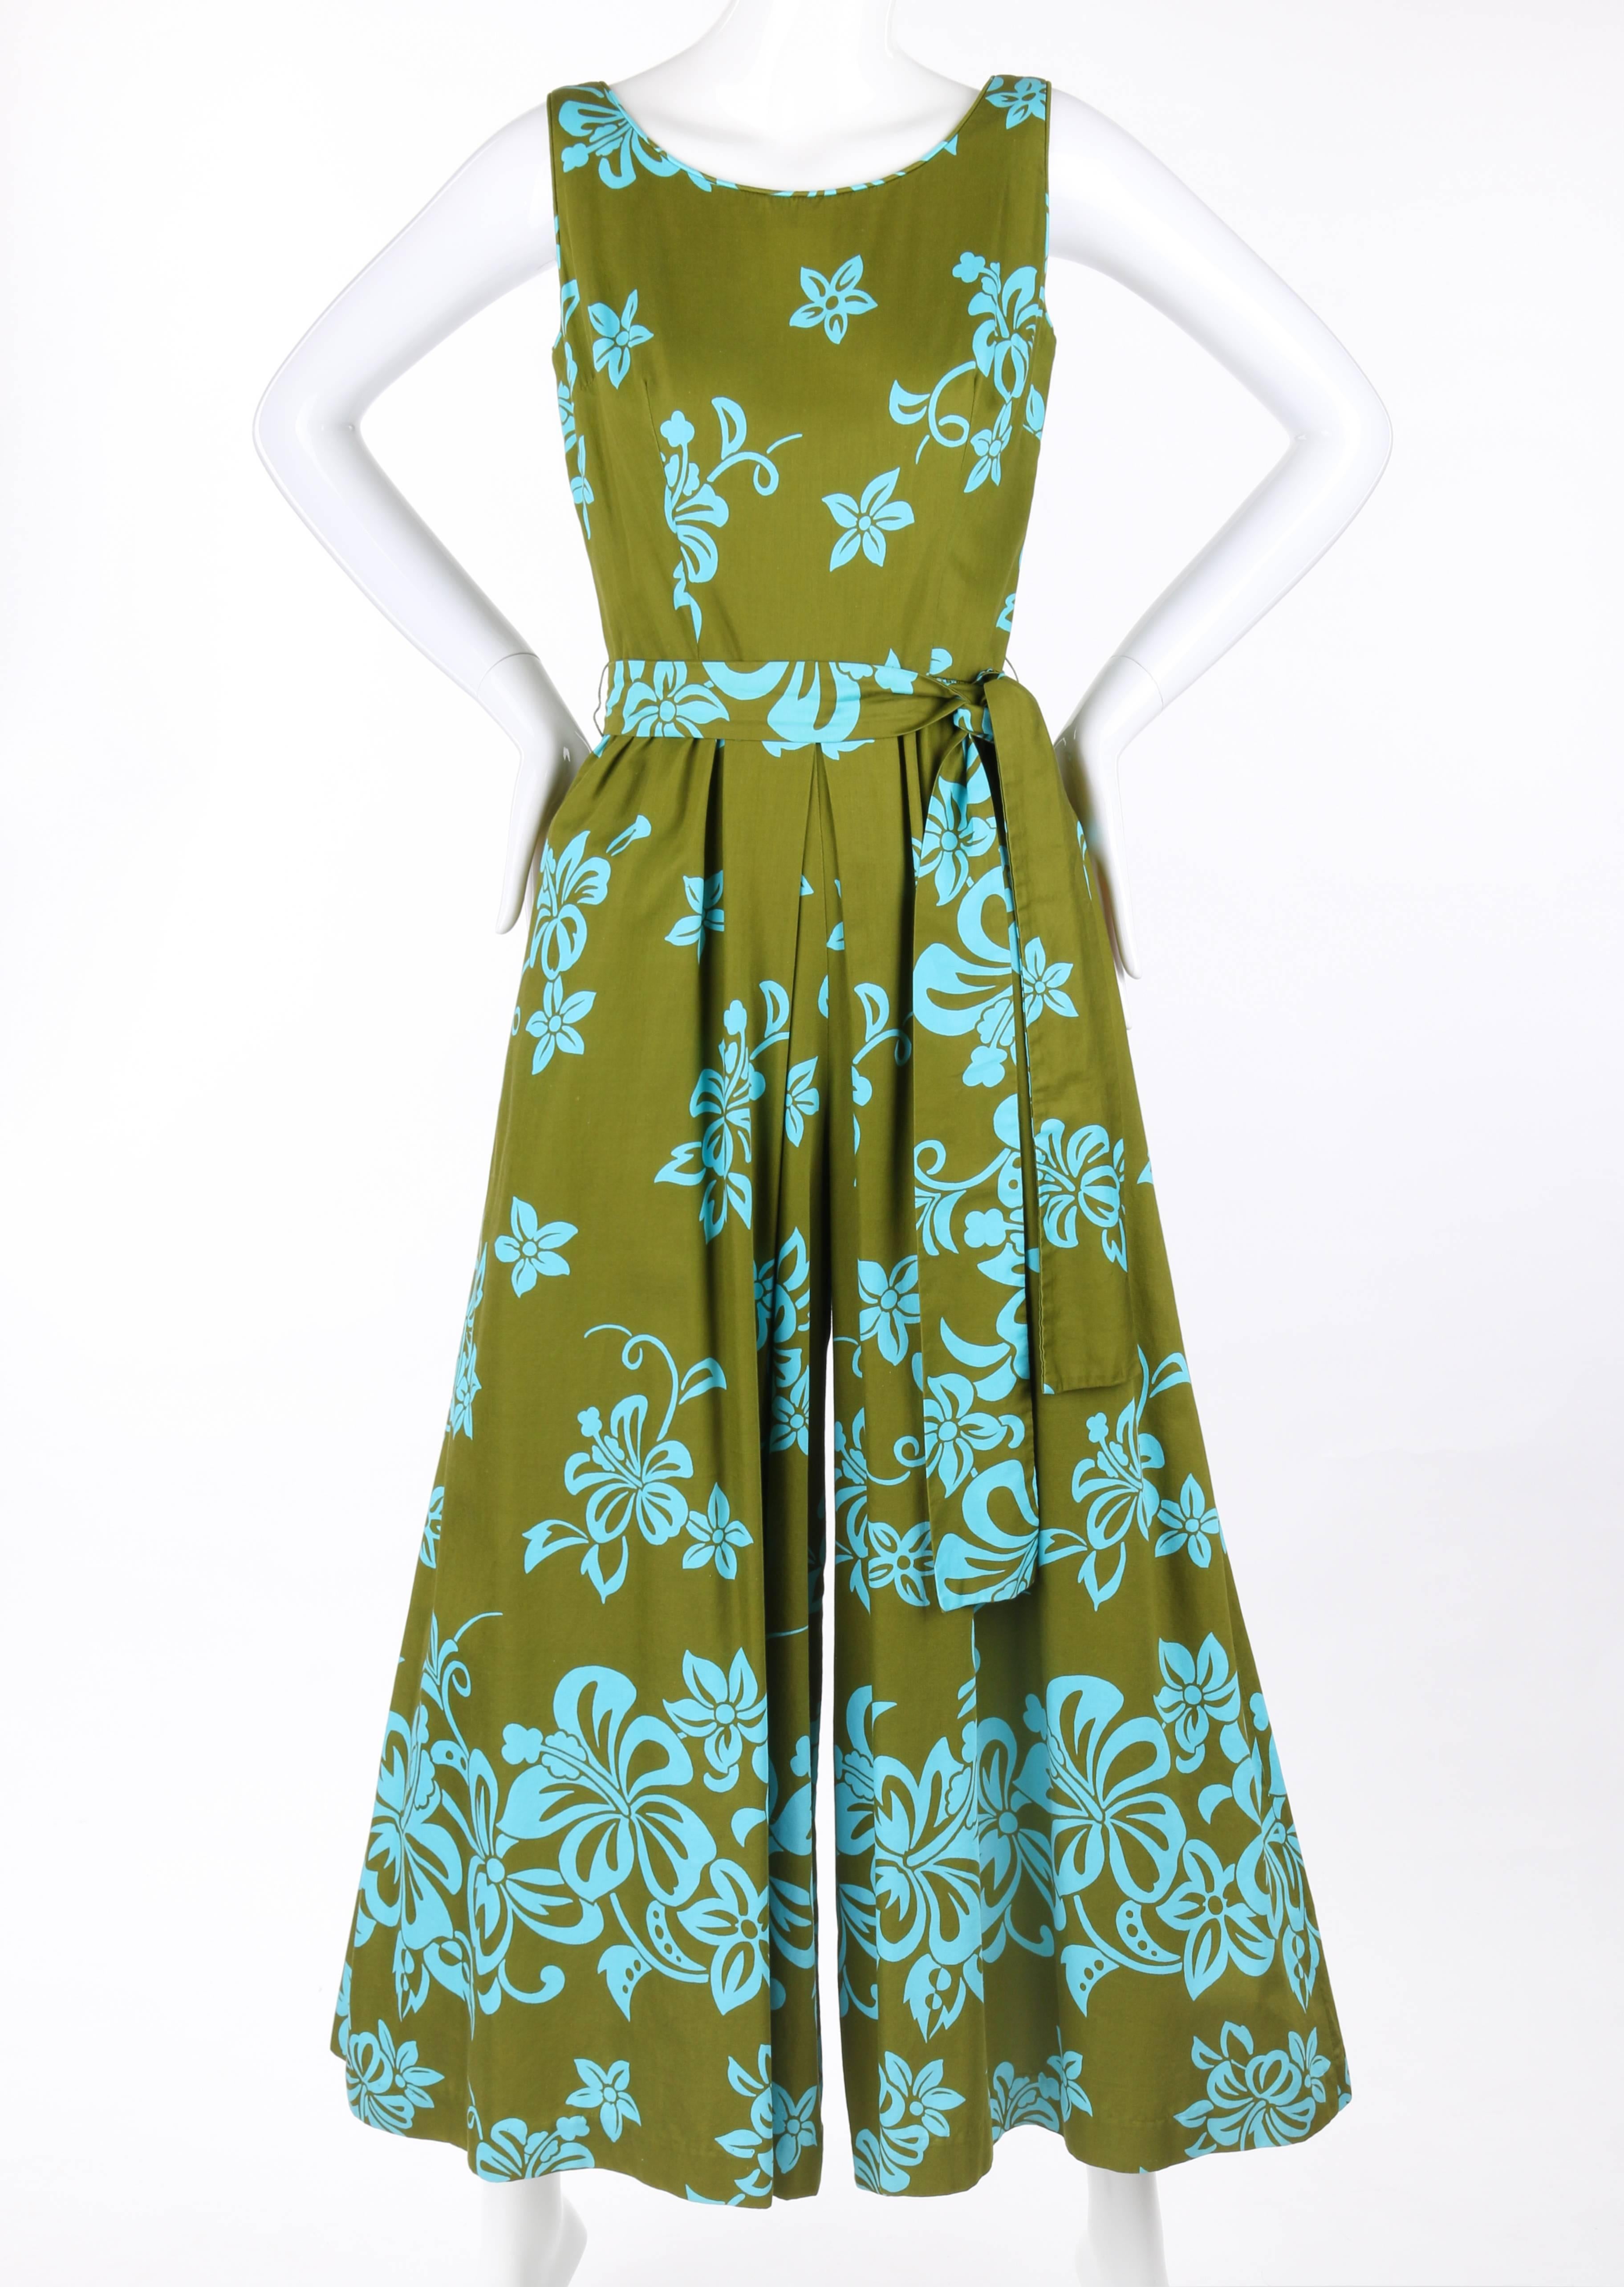 Vintage Waltah Clarke's Hawaiian Shop c.1960's floral jumpsuit. Olive green with turquoise tropical floral print. Sleeveless. Scoop neckline with low back. Gathered waistline with center front and back inverted box pleat. Wide palazzo style legs.